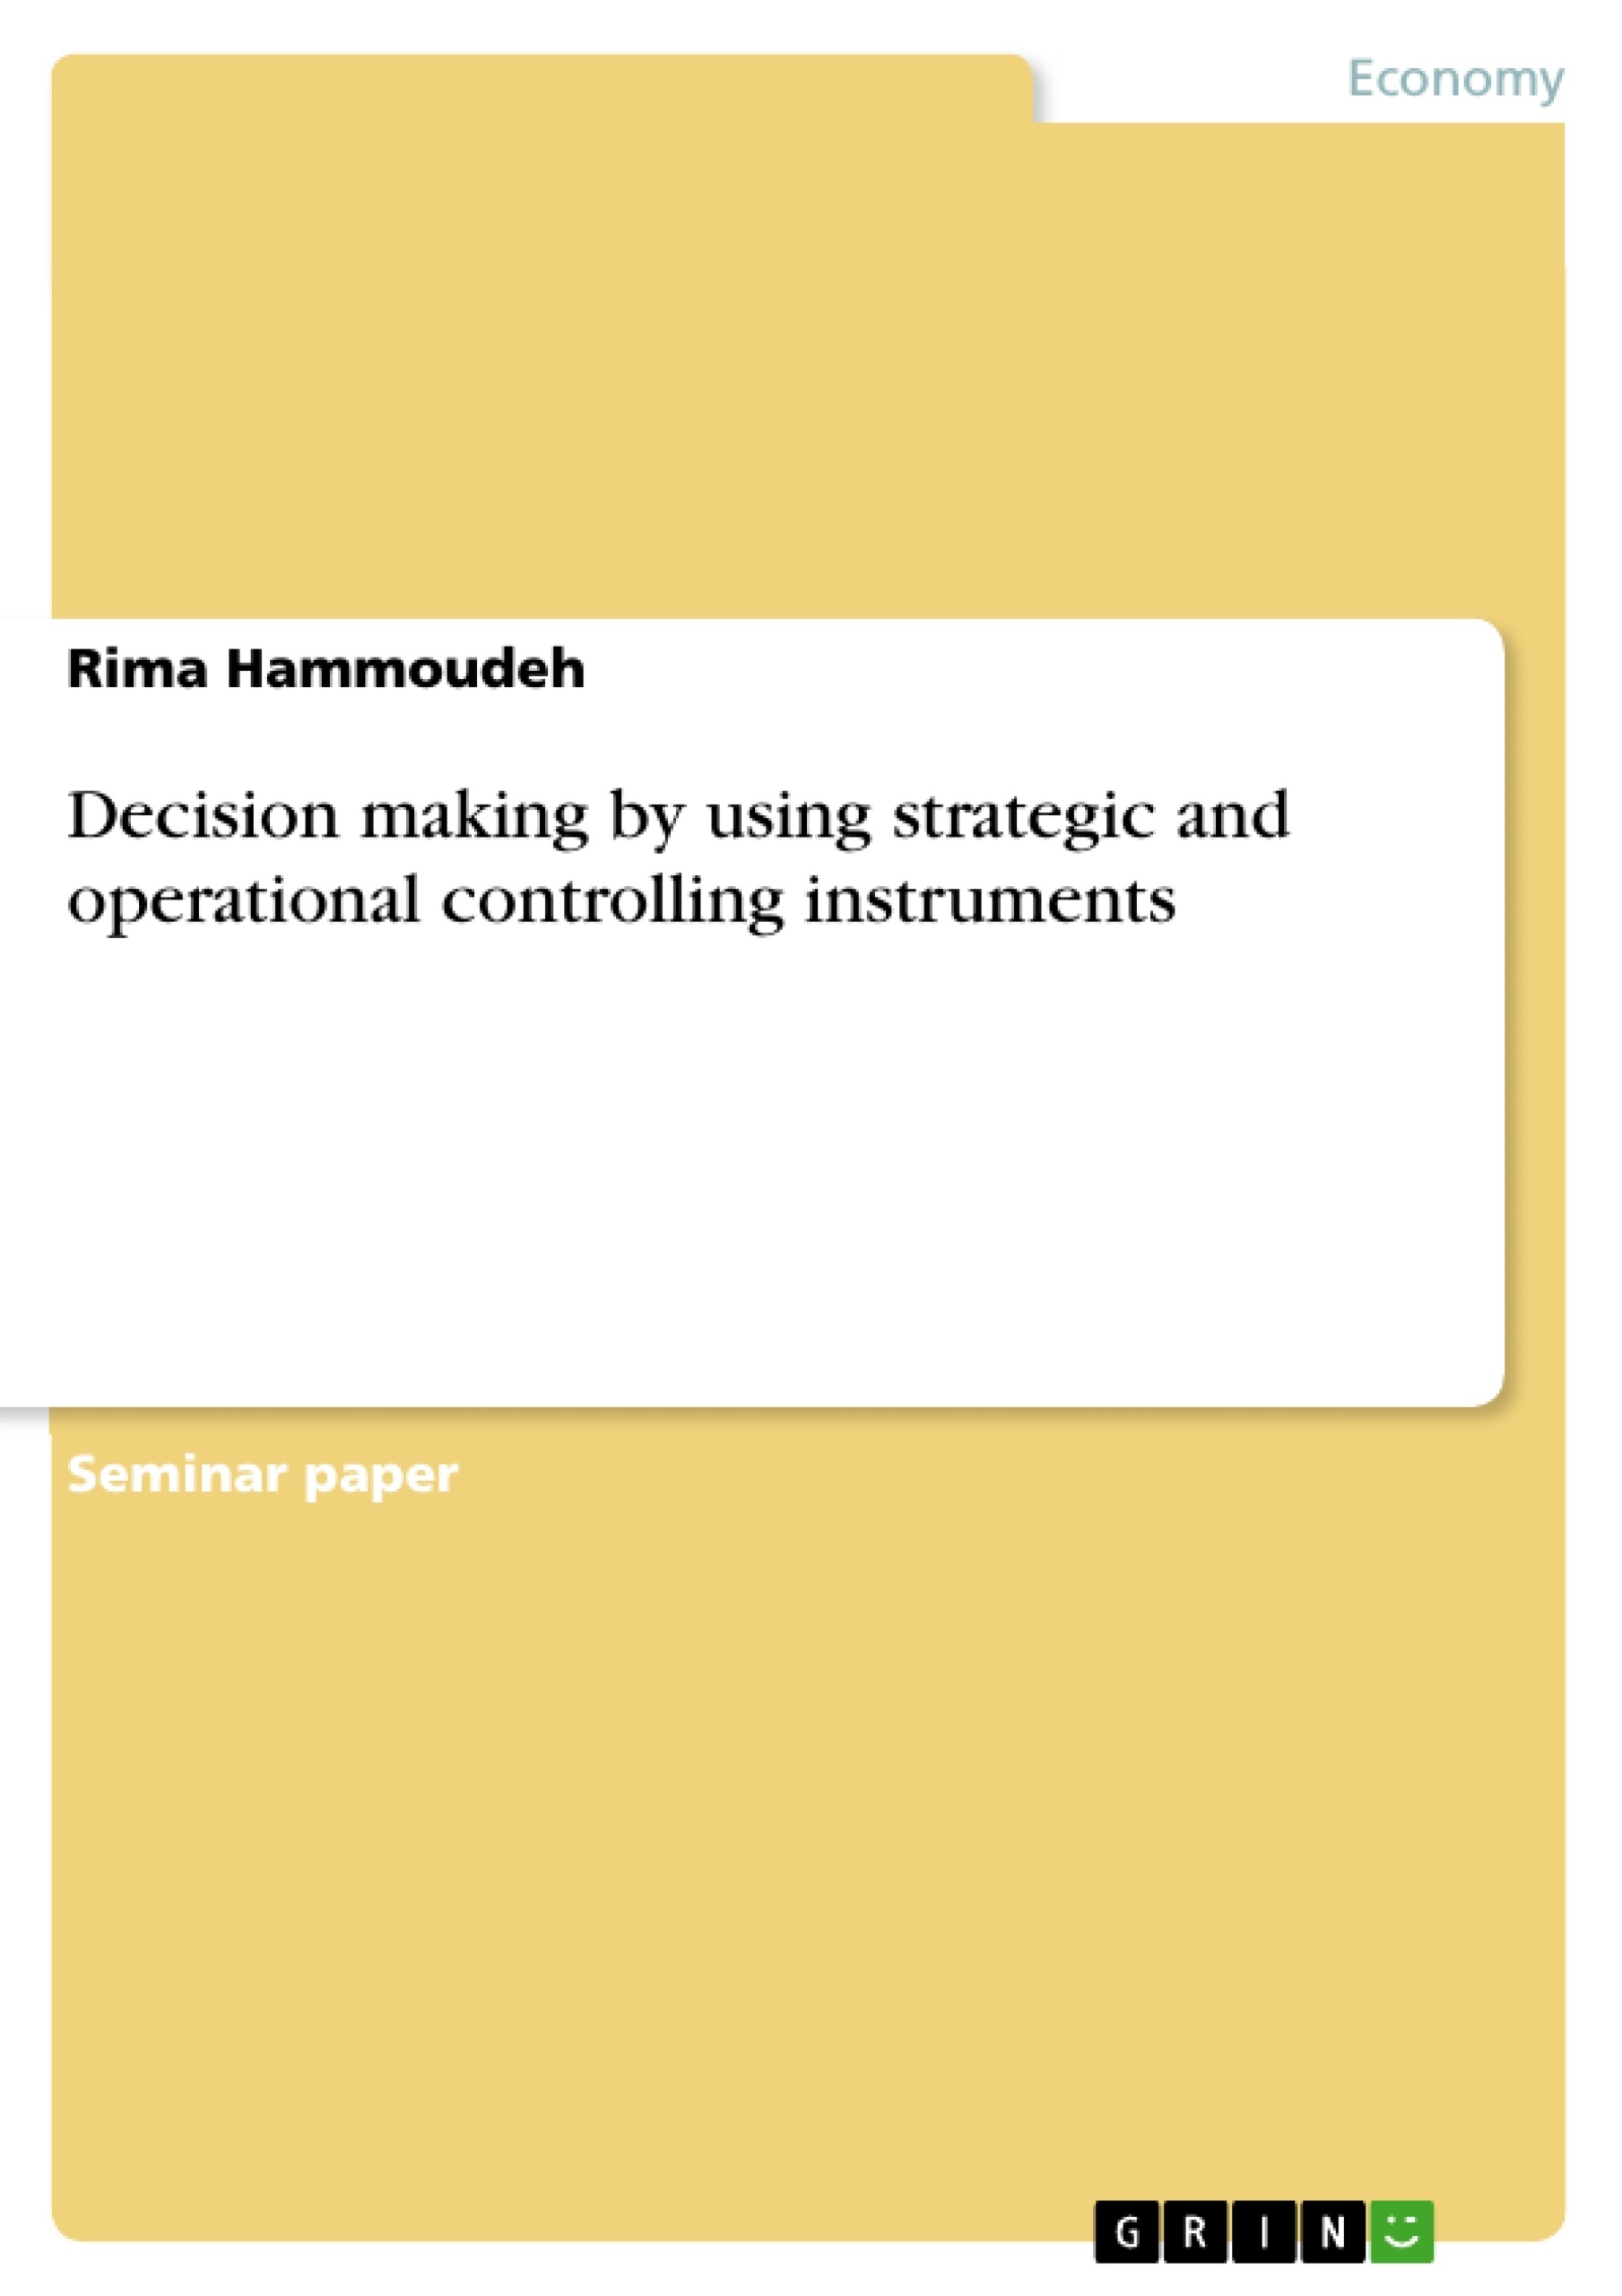 Title: Decision making by using strategic and operational controlling instruments